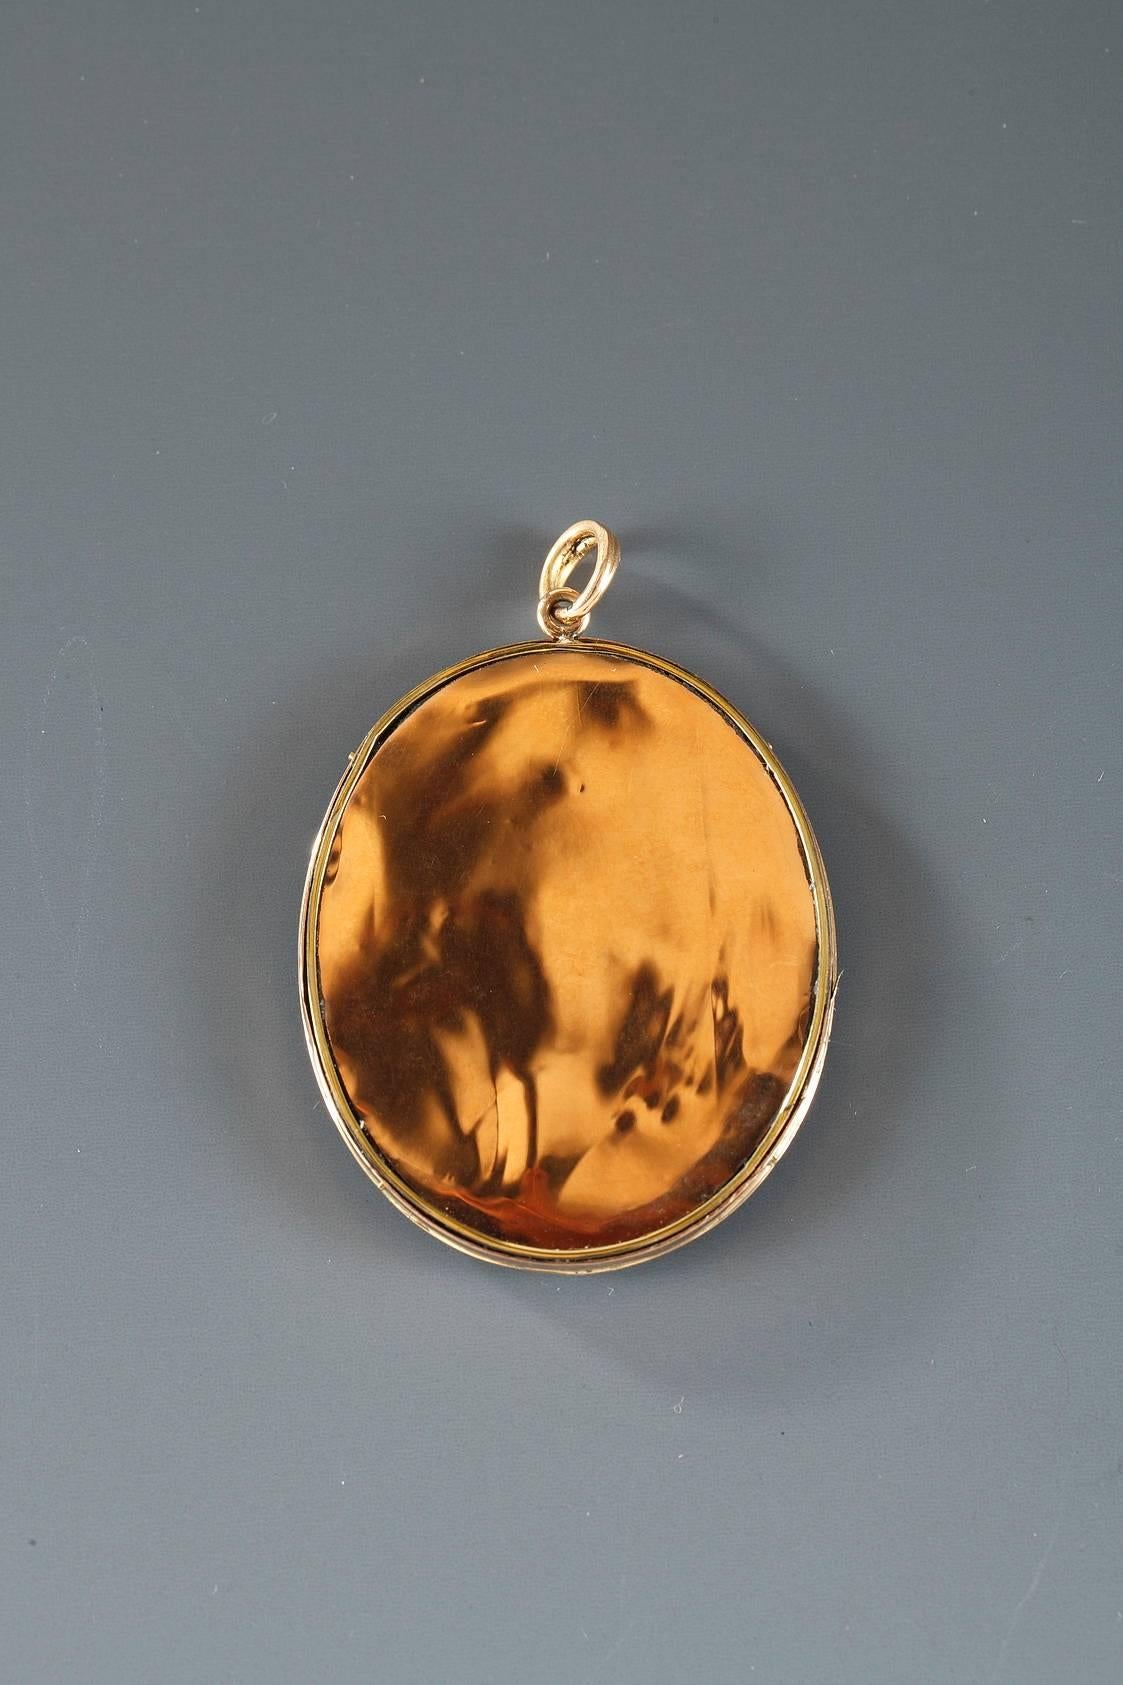 Flat pendant in the 18th century pastoral style, showing a young woman carrying roses in her gathered skirt and walking toward her suitor, who is sitting on the grass. A castle is visible in the background. It is mounted in gold with a black enamel